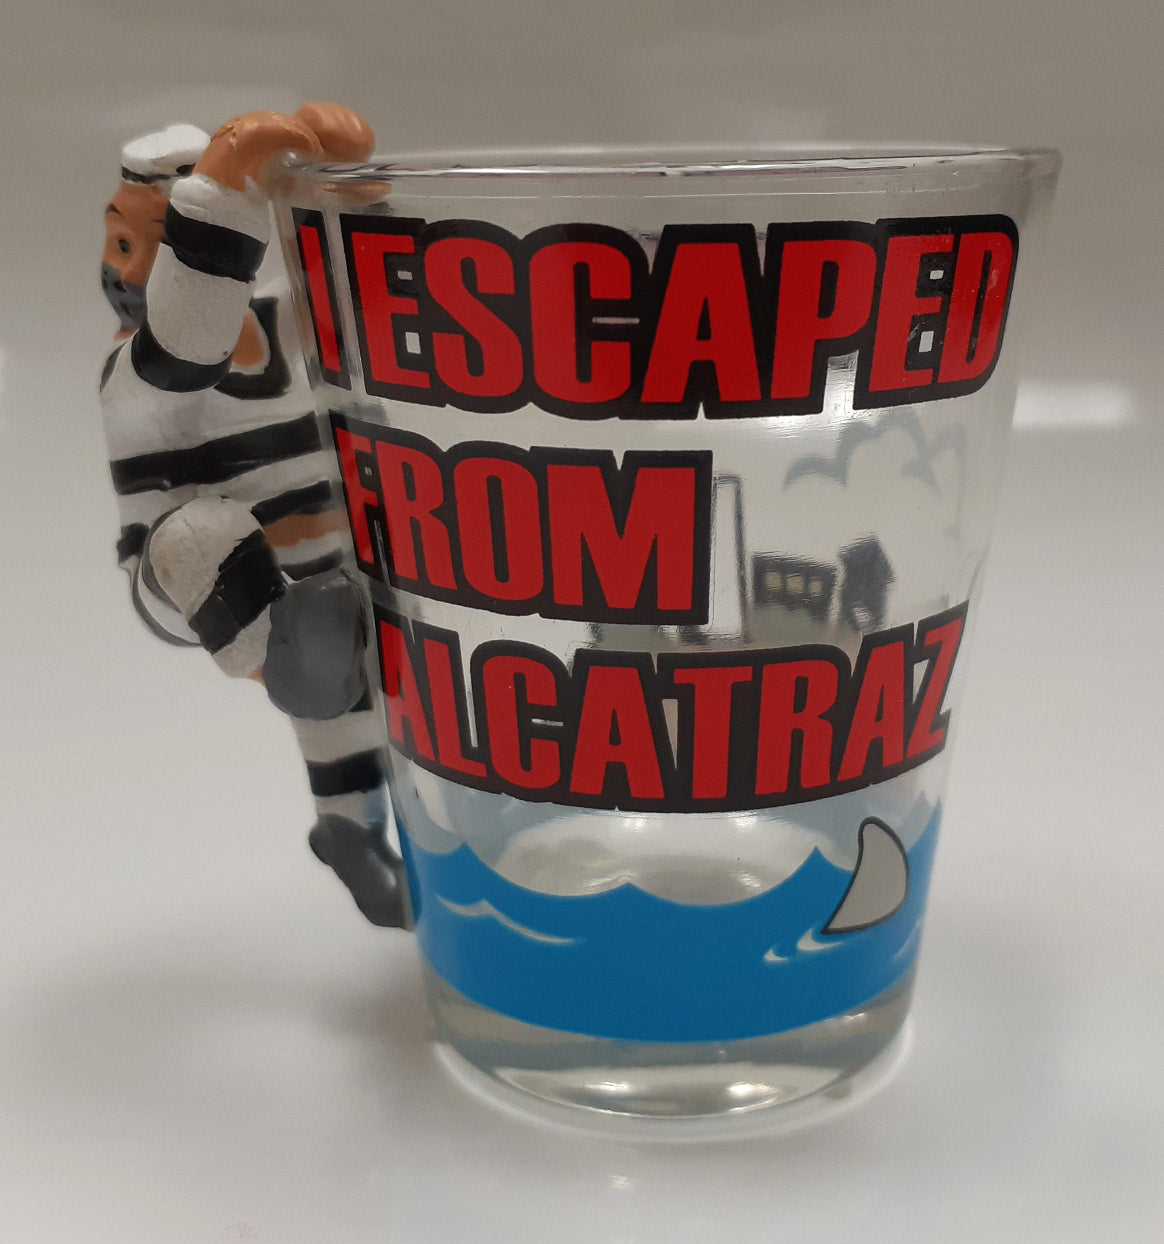 Shot Glass with escaping prisoner "I Escaped From Alcatraz"